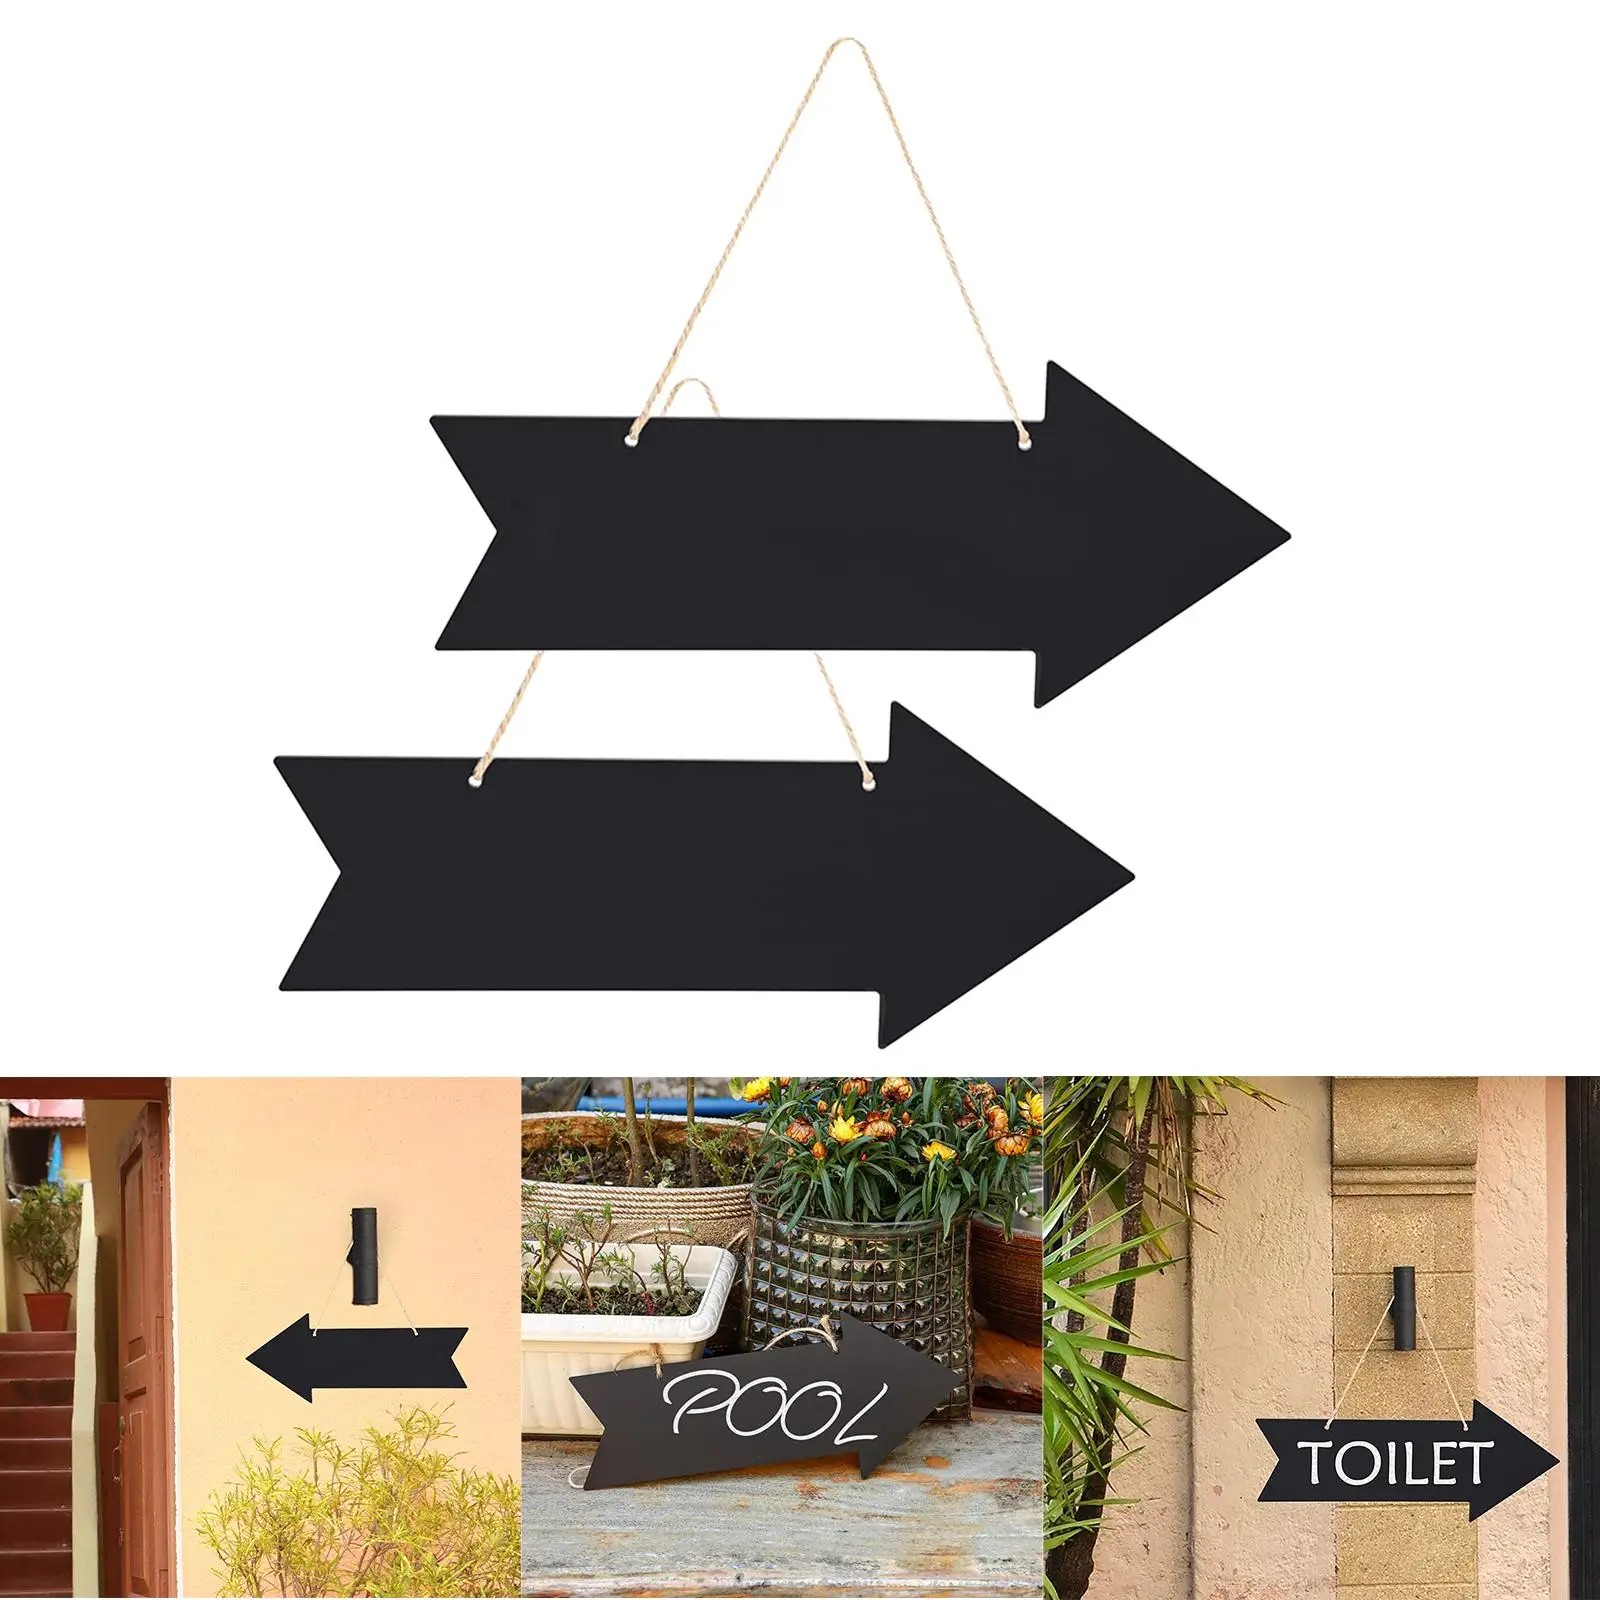 Acrylic Arrow Chalkboard Sign directional Sign Blank Two Sided Hanging Blackboard Direction Sign for Ceremony Party Wedding Bar